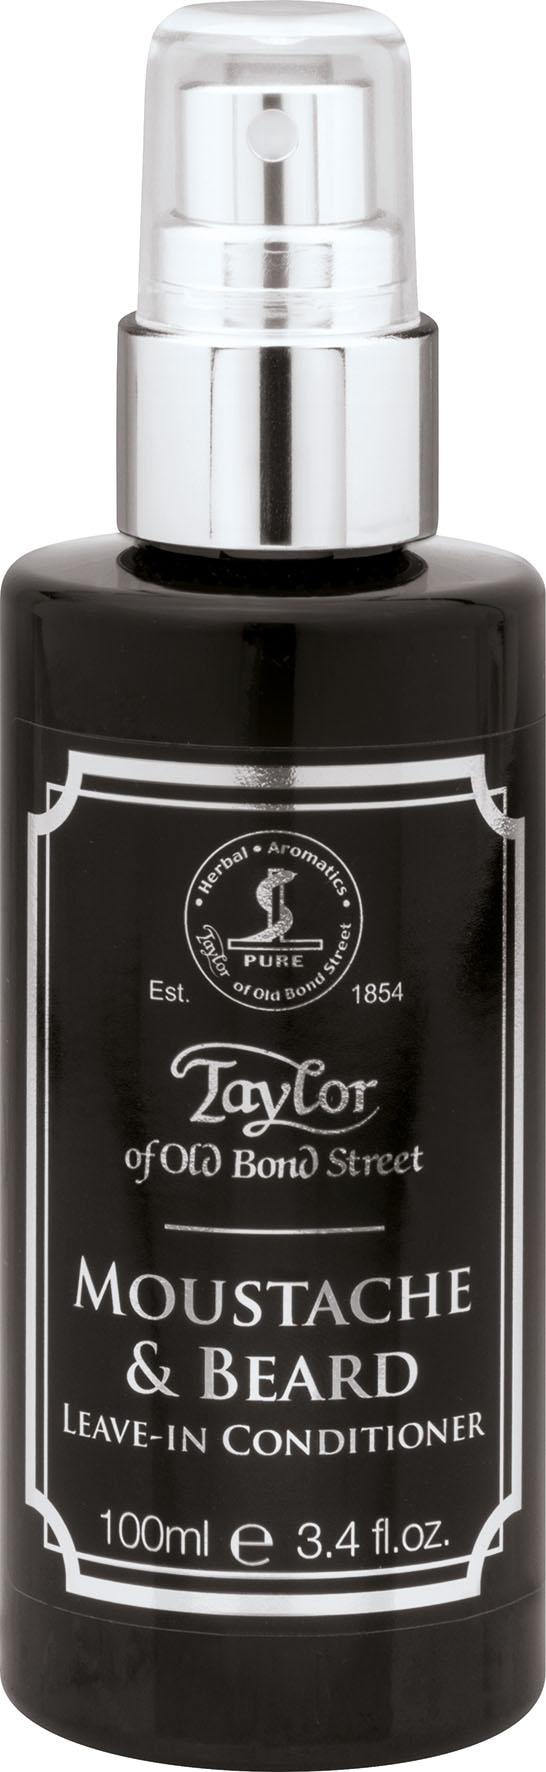 OTTO & »Moustache Conditioner« Taylor online Street Bond Bartconditioner Old bei of Leave-In kaufen Beard